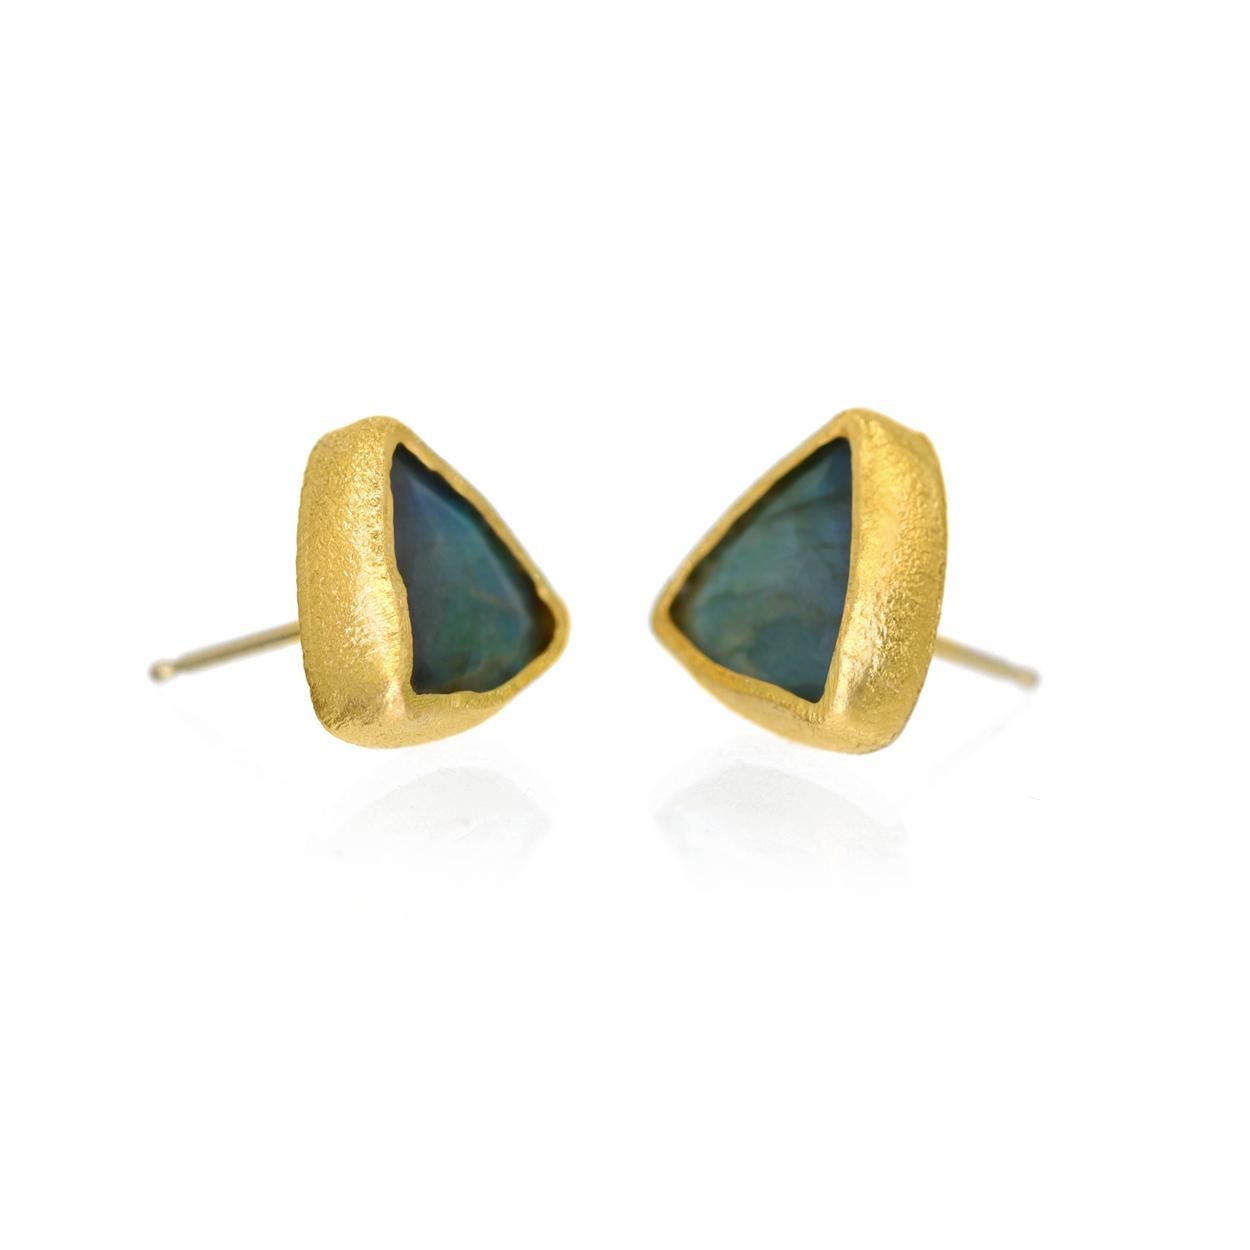 One of a Kind Stud Earrings handcrafted by acclaimed jewelry maker Devta Doolan in signature-finished 22k yellow gold showcasing a beautiful matched pair of shimmering, flashy faceted labradorite triangles, and finished with 18k yellow gold posts